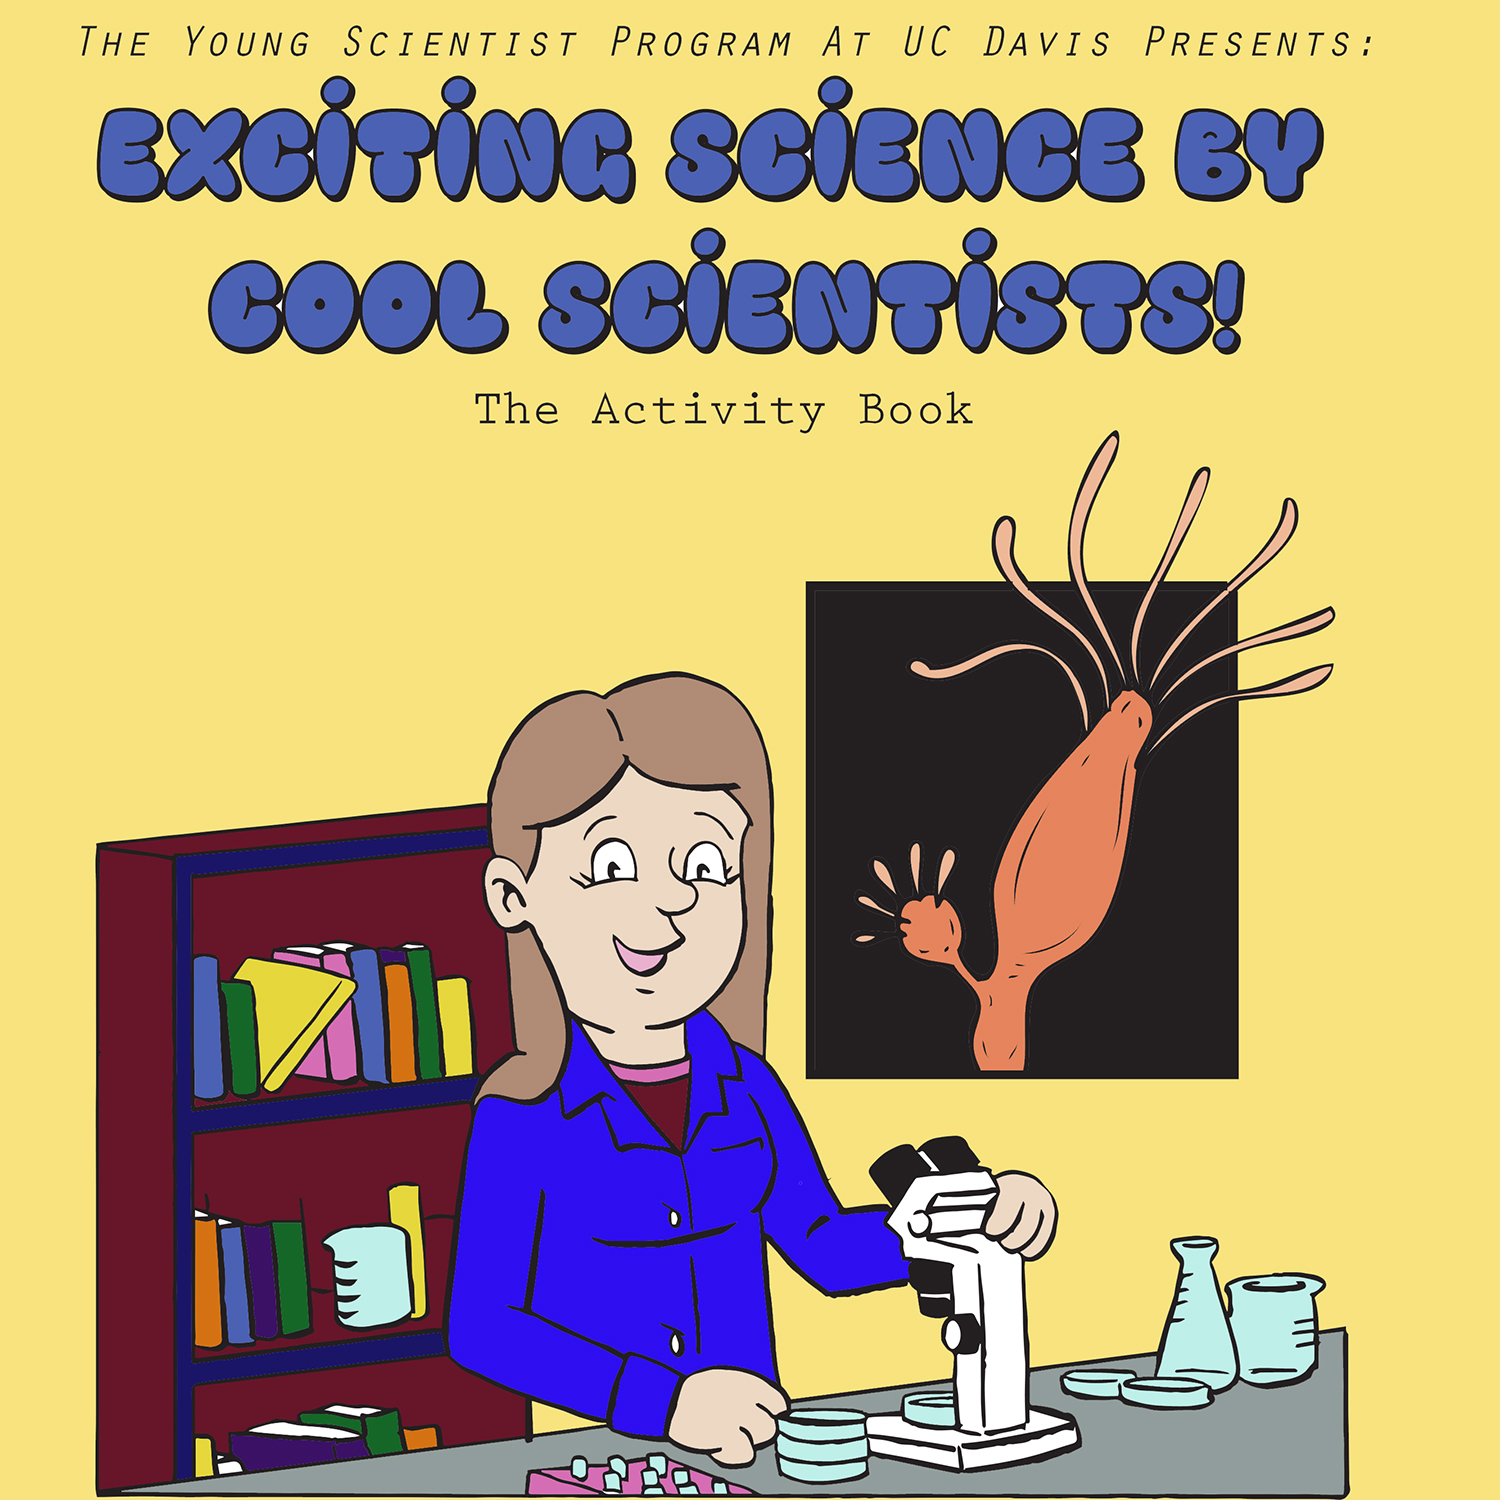 The activity book Exciting Science by Cool Scientists! features cartoons of College of Biological Sciences faculty members Celina Juliano, Jodi Nunnari, Kassandra Ori-Mckenney, Judy Callis, Dan Starr and Bruce Draper along with their respective model organisms. Photo courtesy of the Young Scientist Program